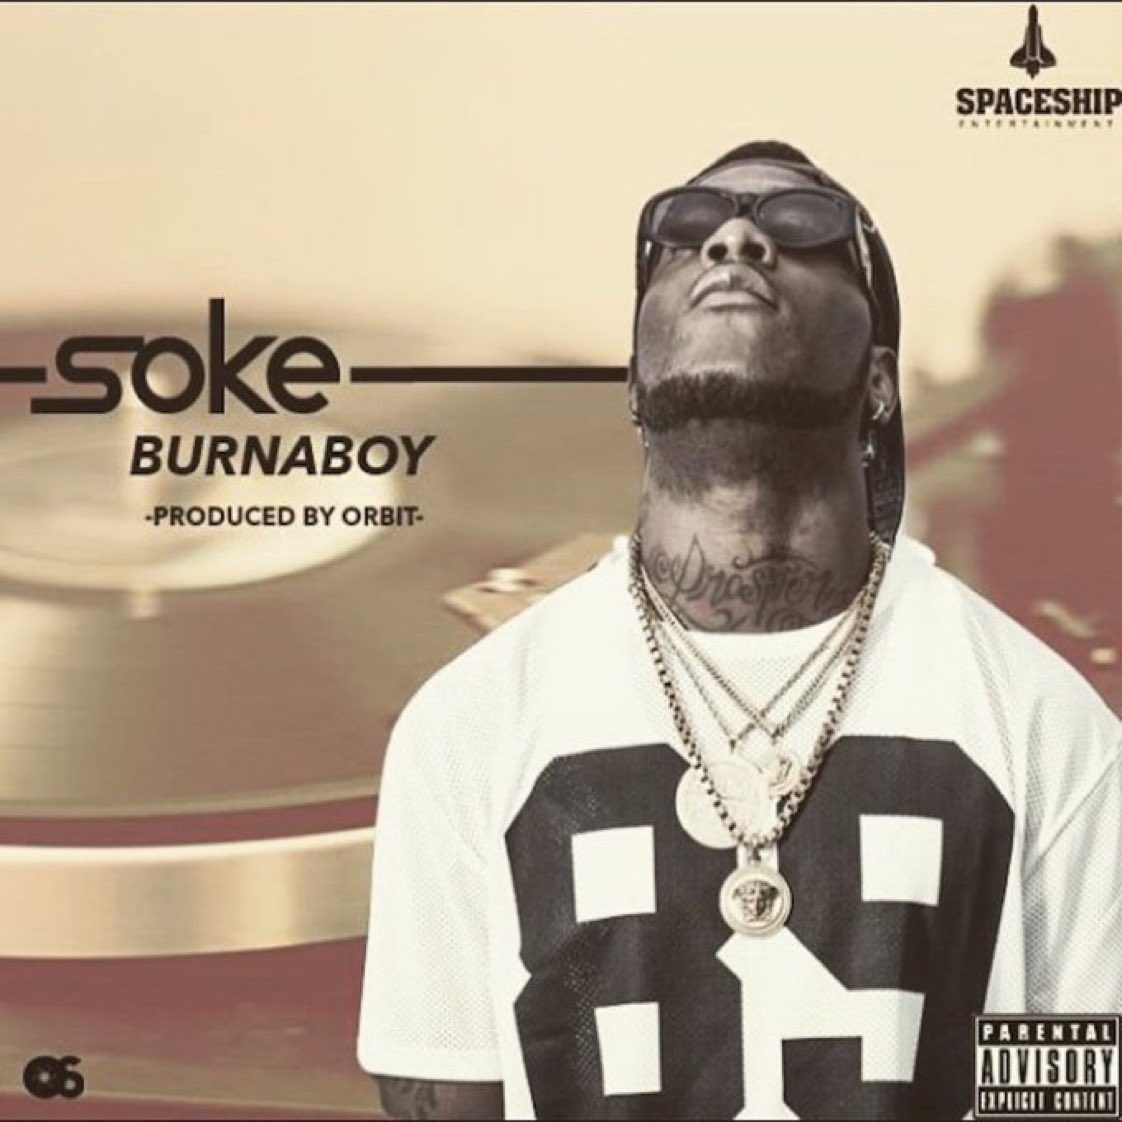 .@burnaboy’s “Soke” has surpassed 20 million streams on Spotify. It becomes his 62nd song to reach this milestone.